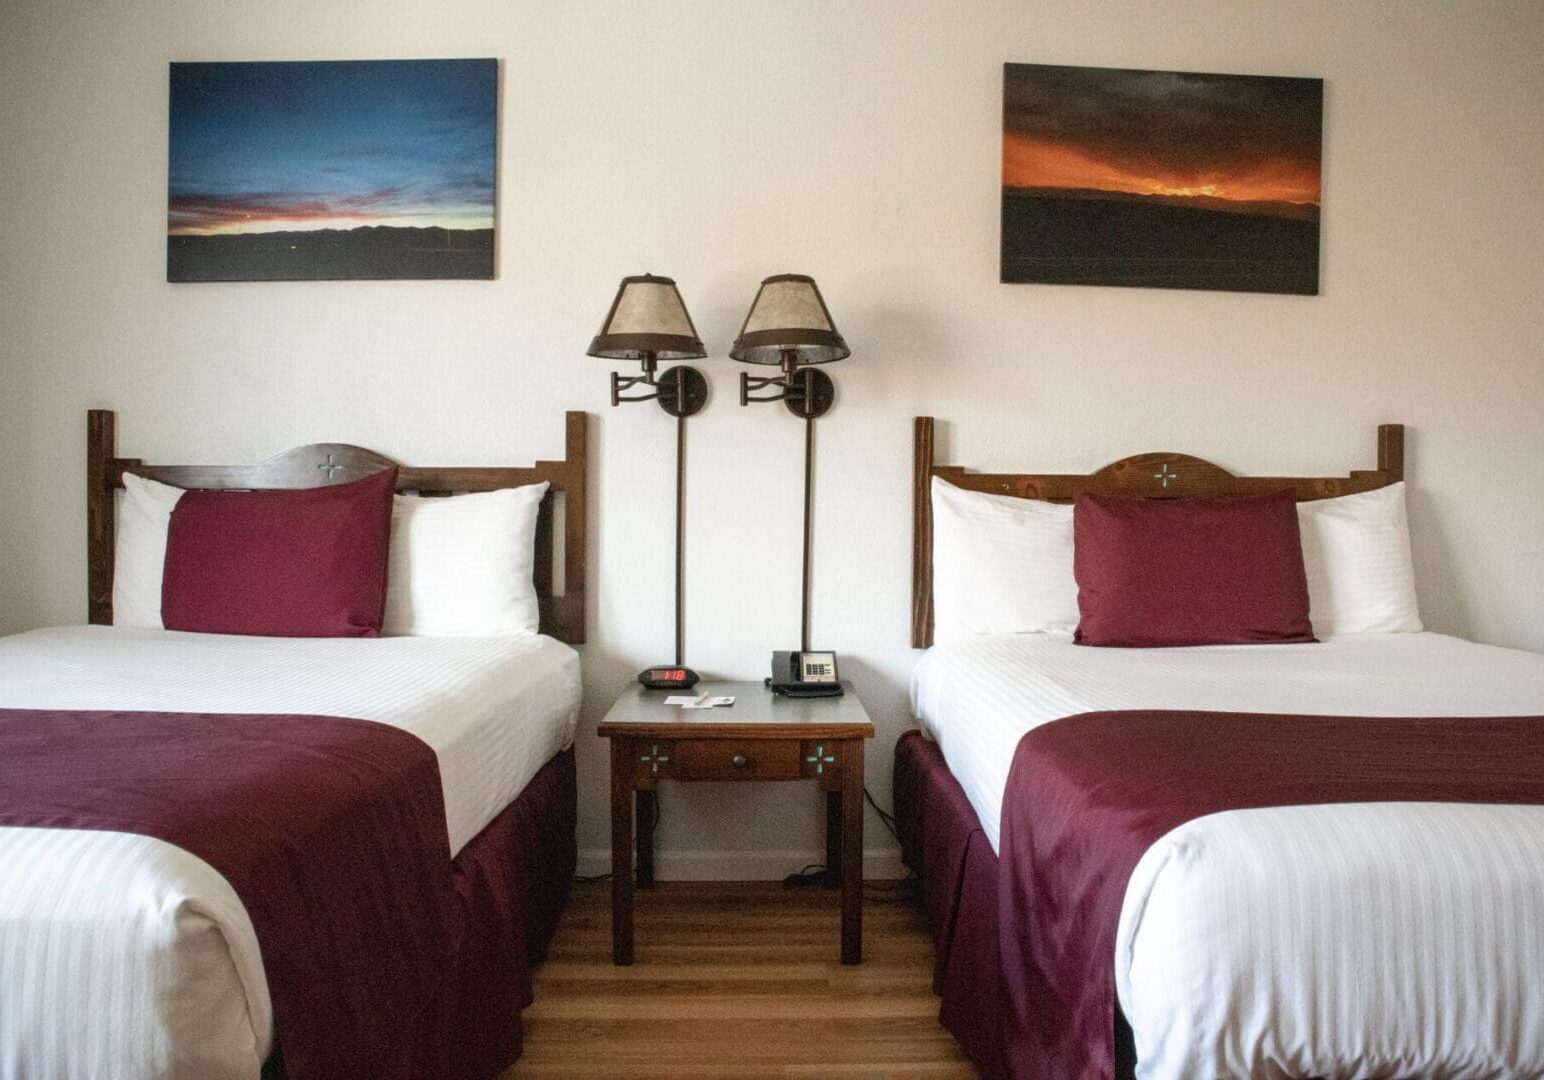 Two beds in a room with paintings on the wall.